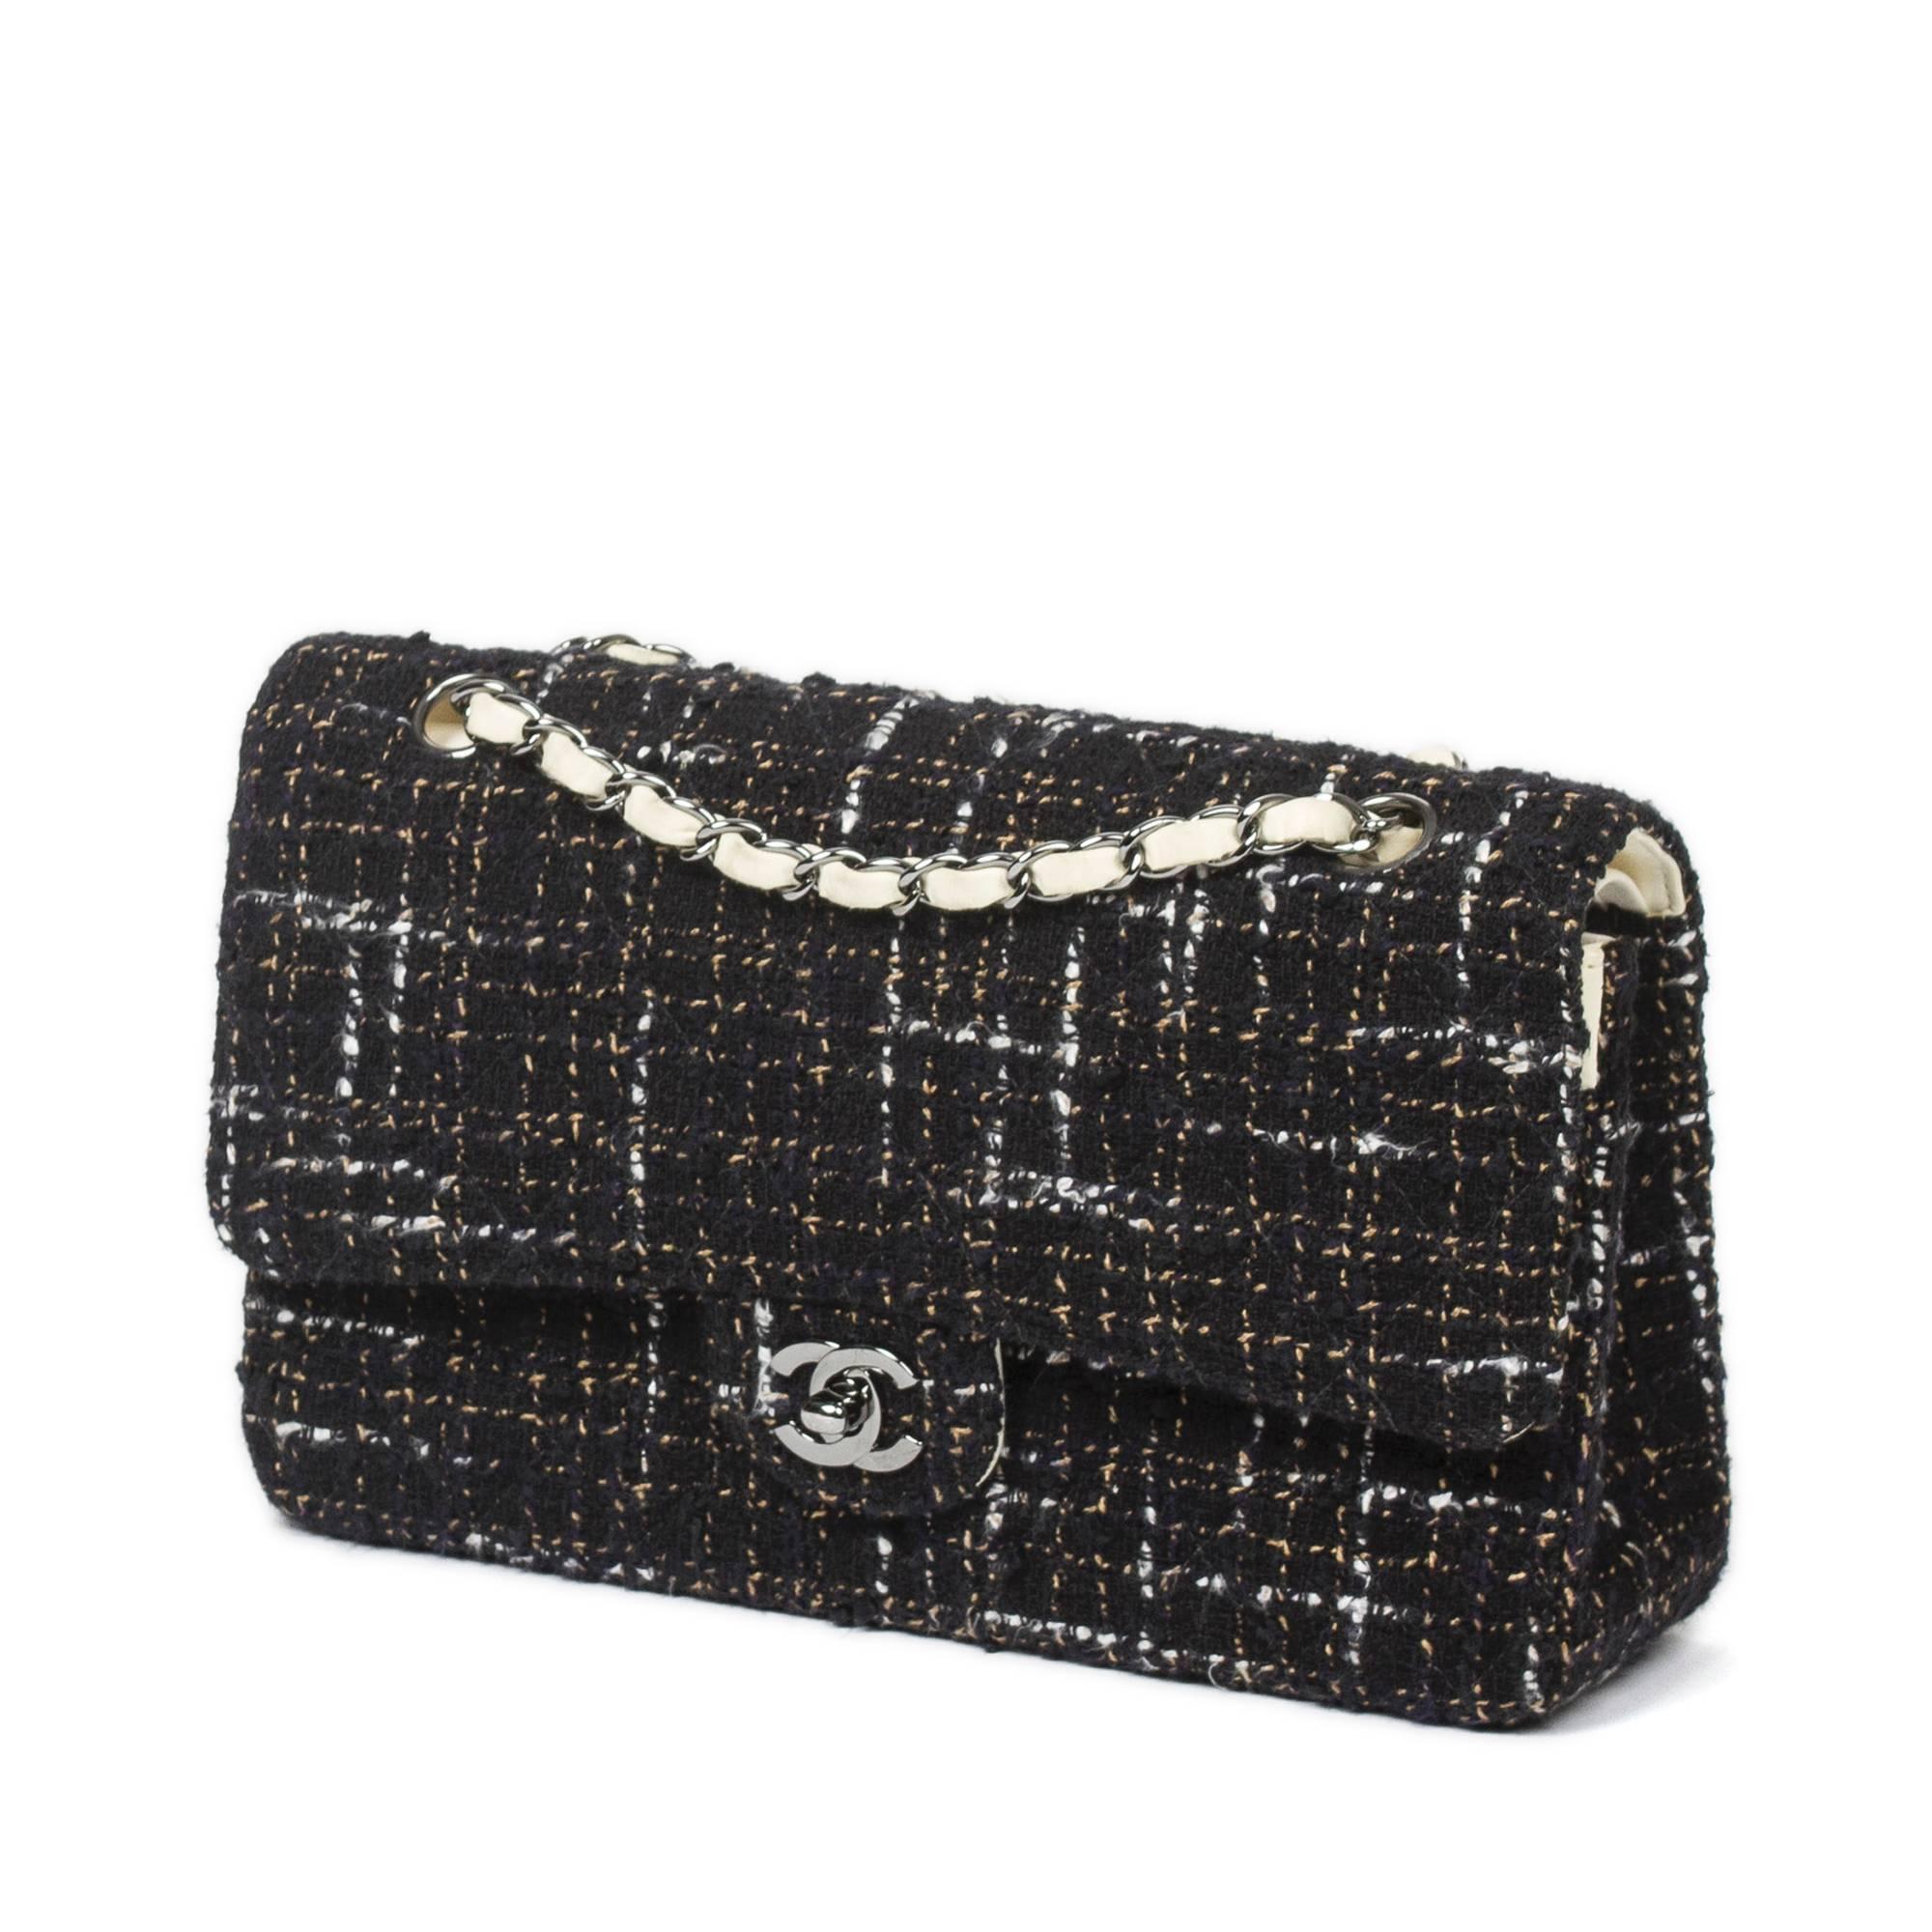 Classic Double Flap 26cm in black tweed with navy, beige and white thread accents, double chain strap interlaced with eggshell color leather (Drop: Single:40cm, Double:22cm), ruthenium tone CC turlock. Slip pocket at the back. Off white leather